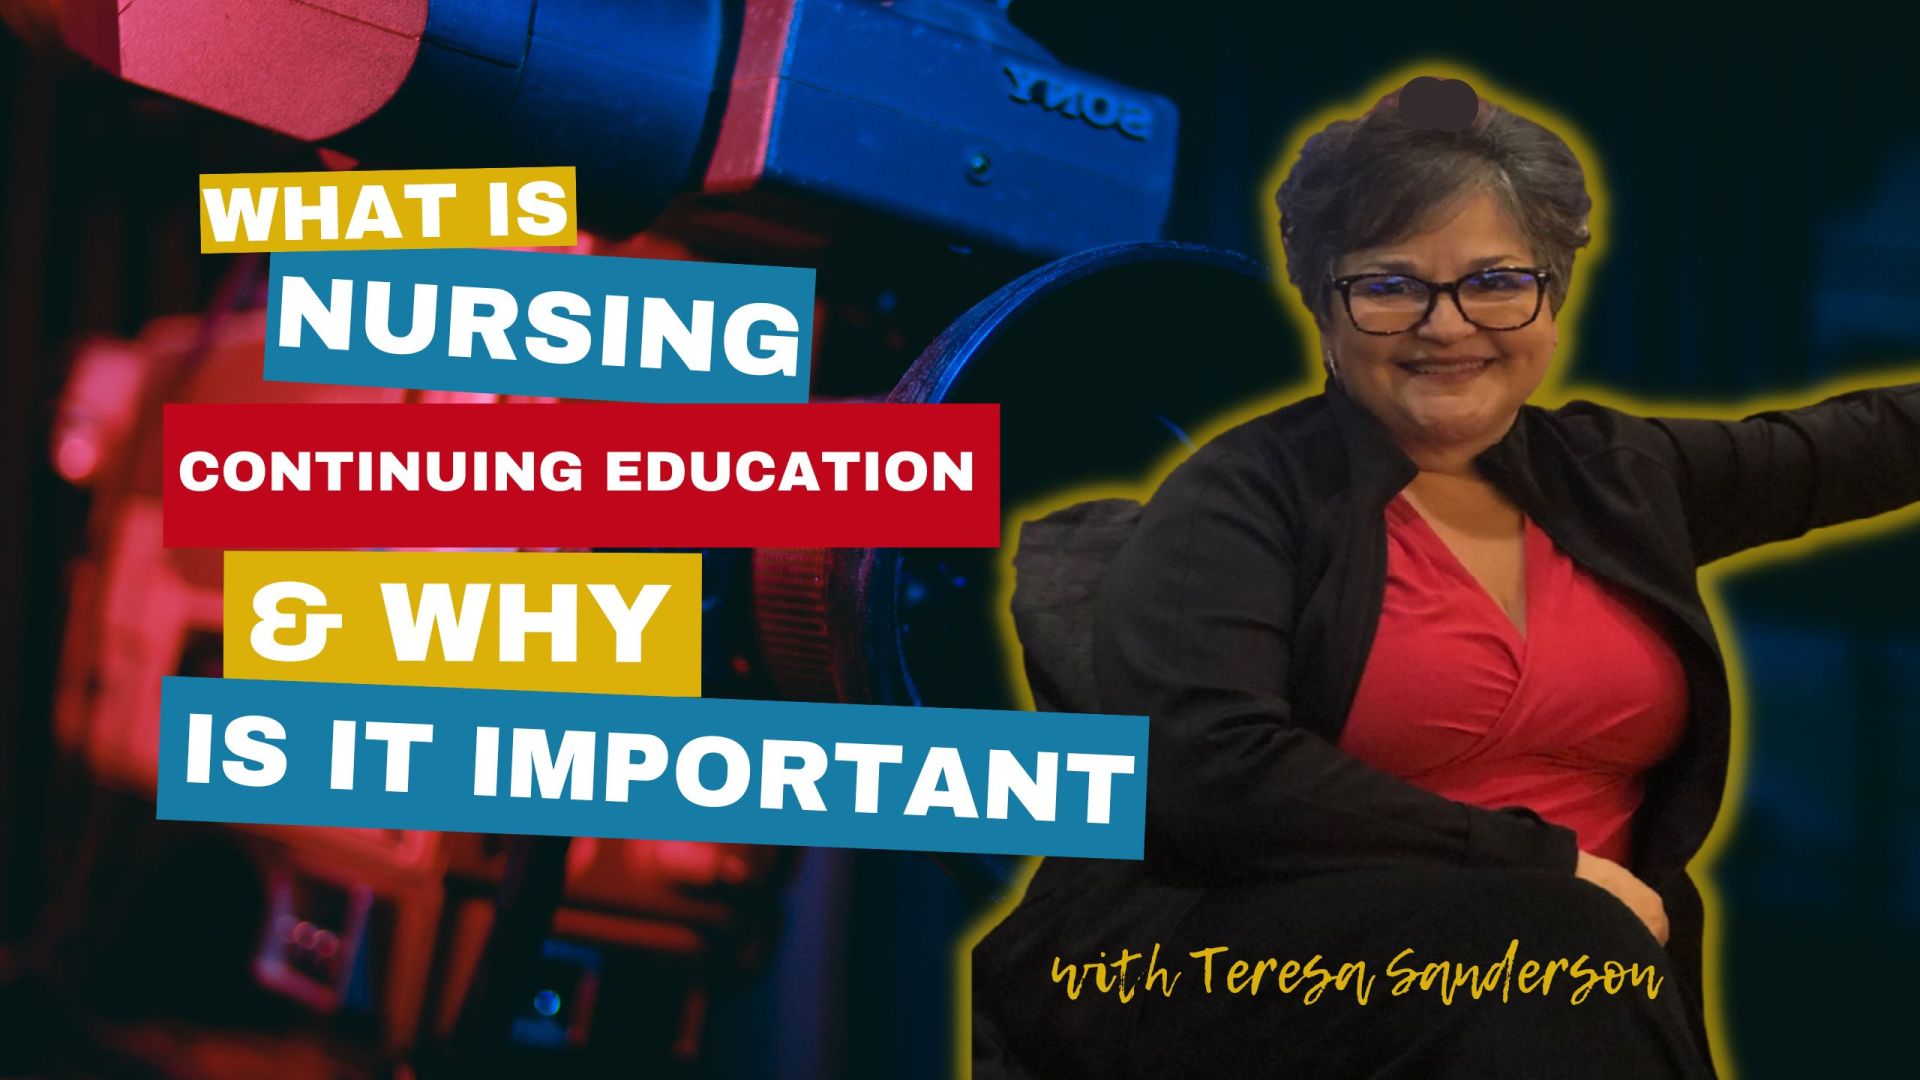 What Is Nursing Continuing Education And Why Is It Important?